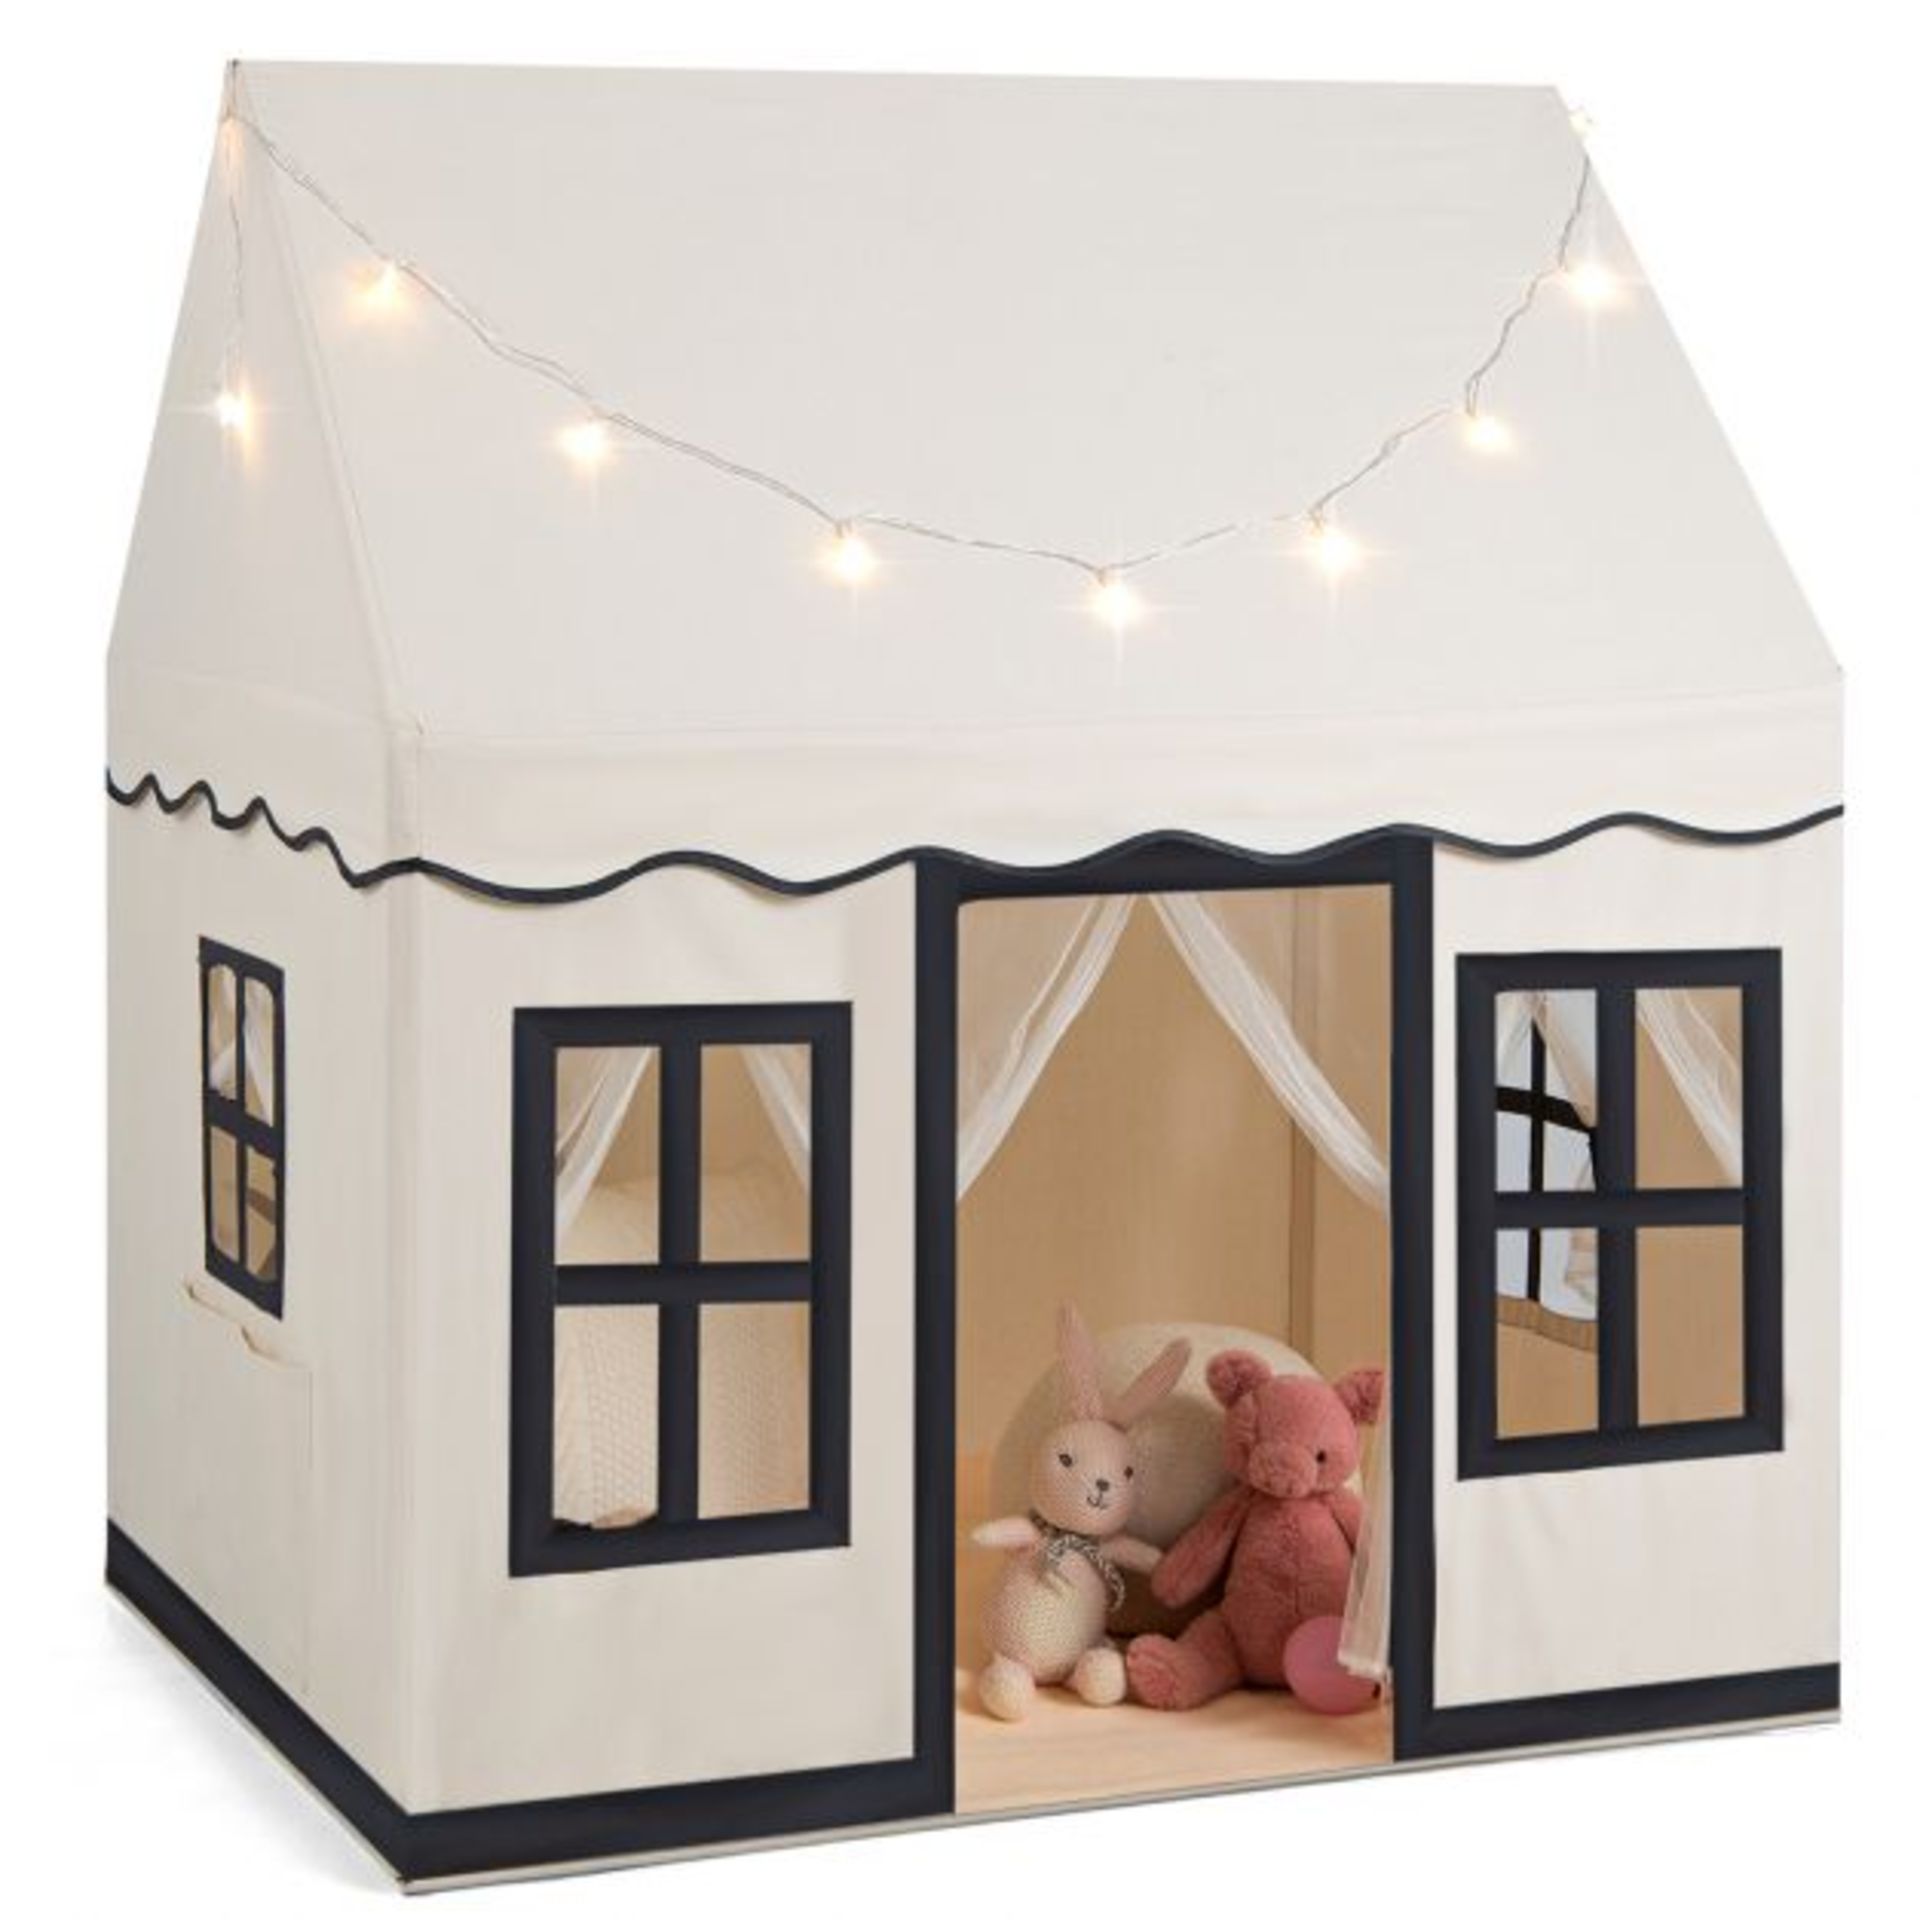 Indoor Kids Play Tent with Star Lights for Children Boys Girls Gift. - SR36. The spacious space